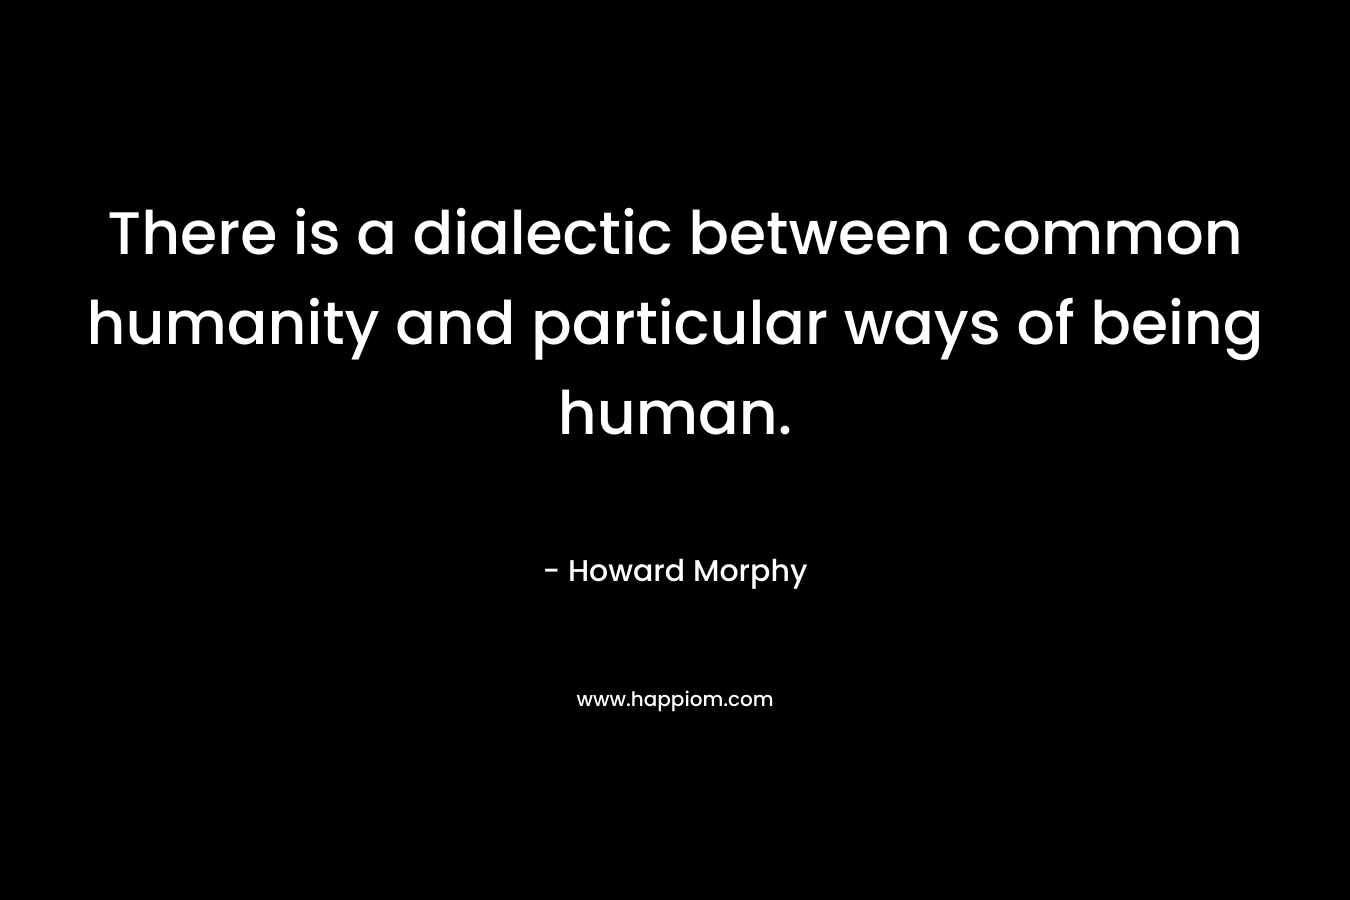 There is a dialectic between common humanity and particular ways of being human. – Howard Morphy